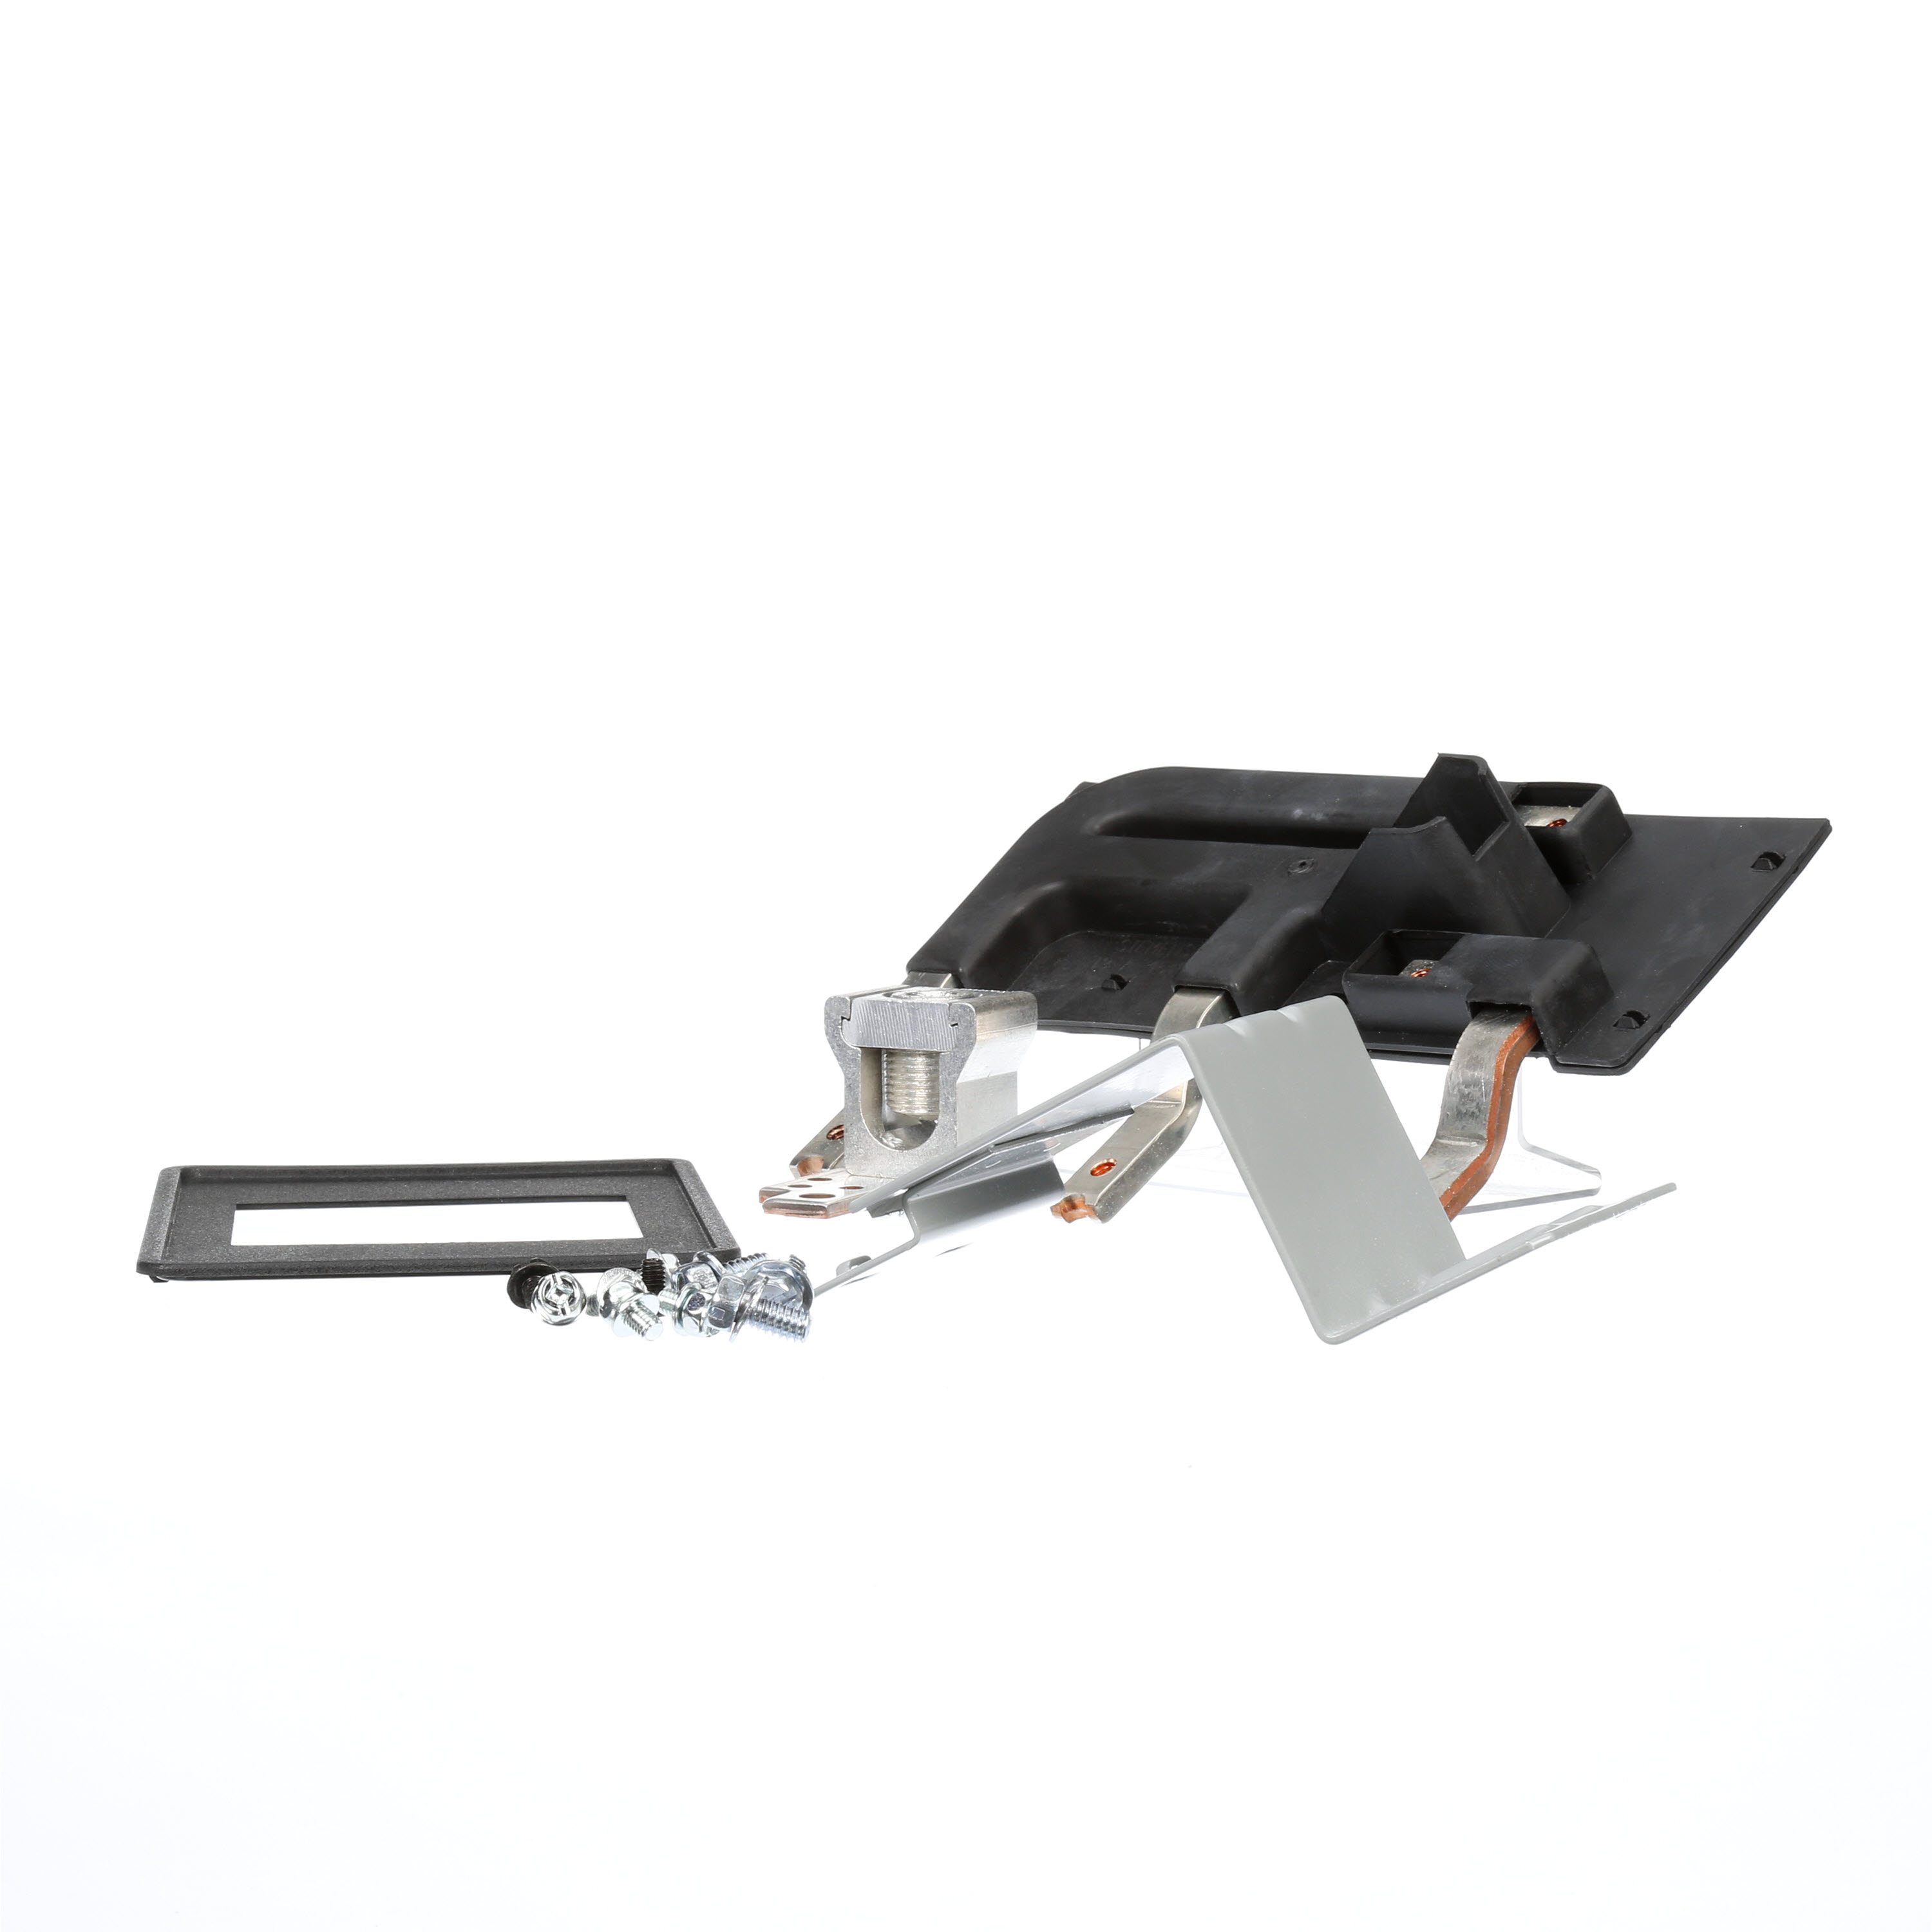 Main or subfeed breaker mounting kit for original P1 interiors. Suitable for circuit breaker type (BL - BLH - HBL) in 3-Phase systems. Rated (100A max). Includes all mounting hardware. Does not include breaker. Not suitable for use with Revised P1 panels produced after December 2014.